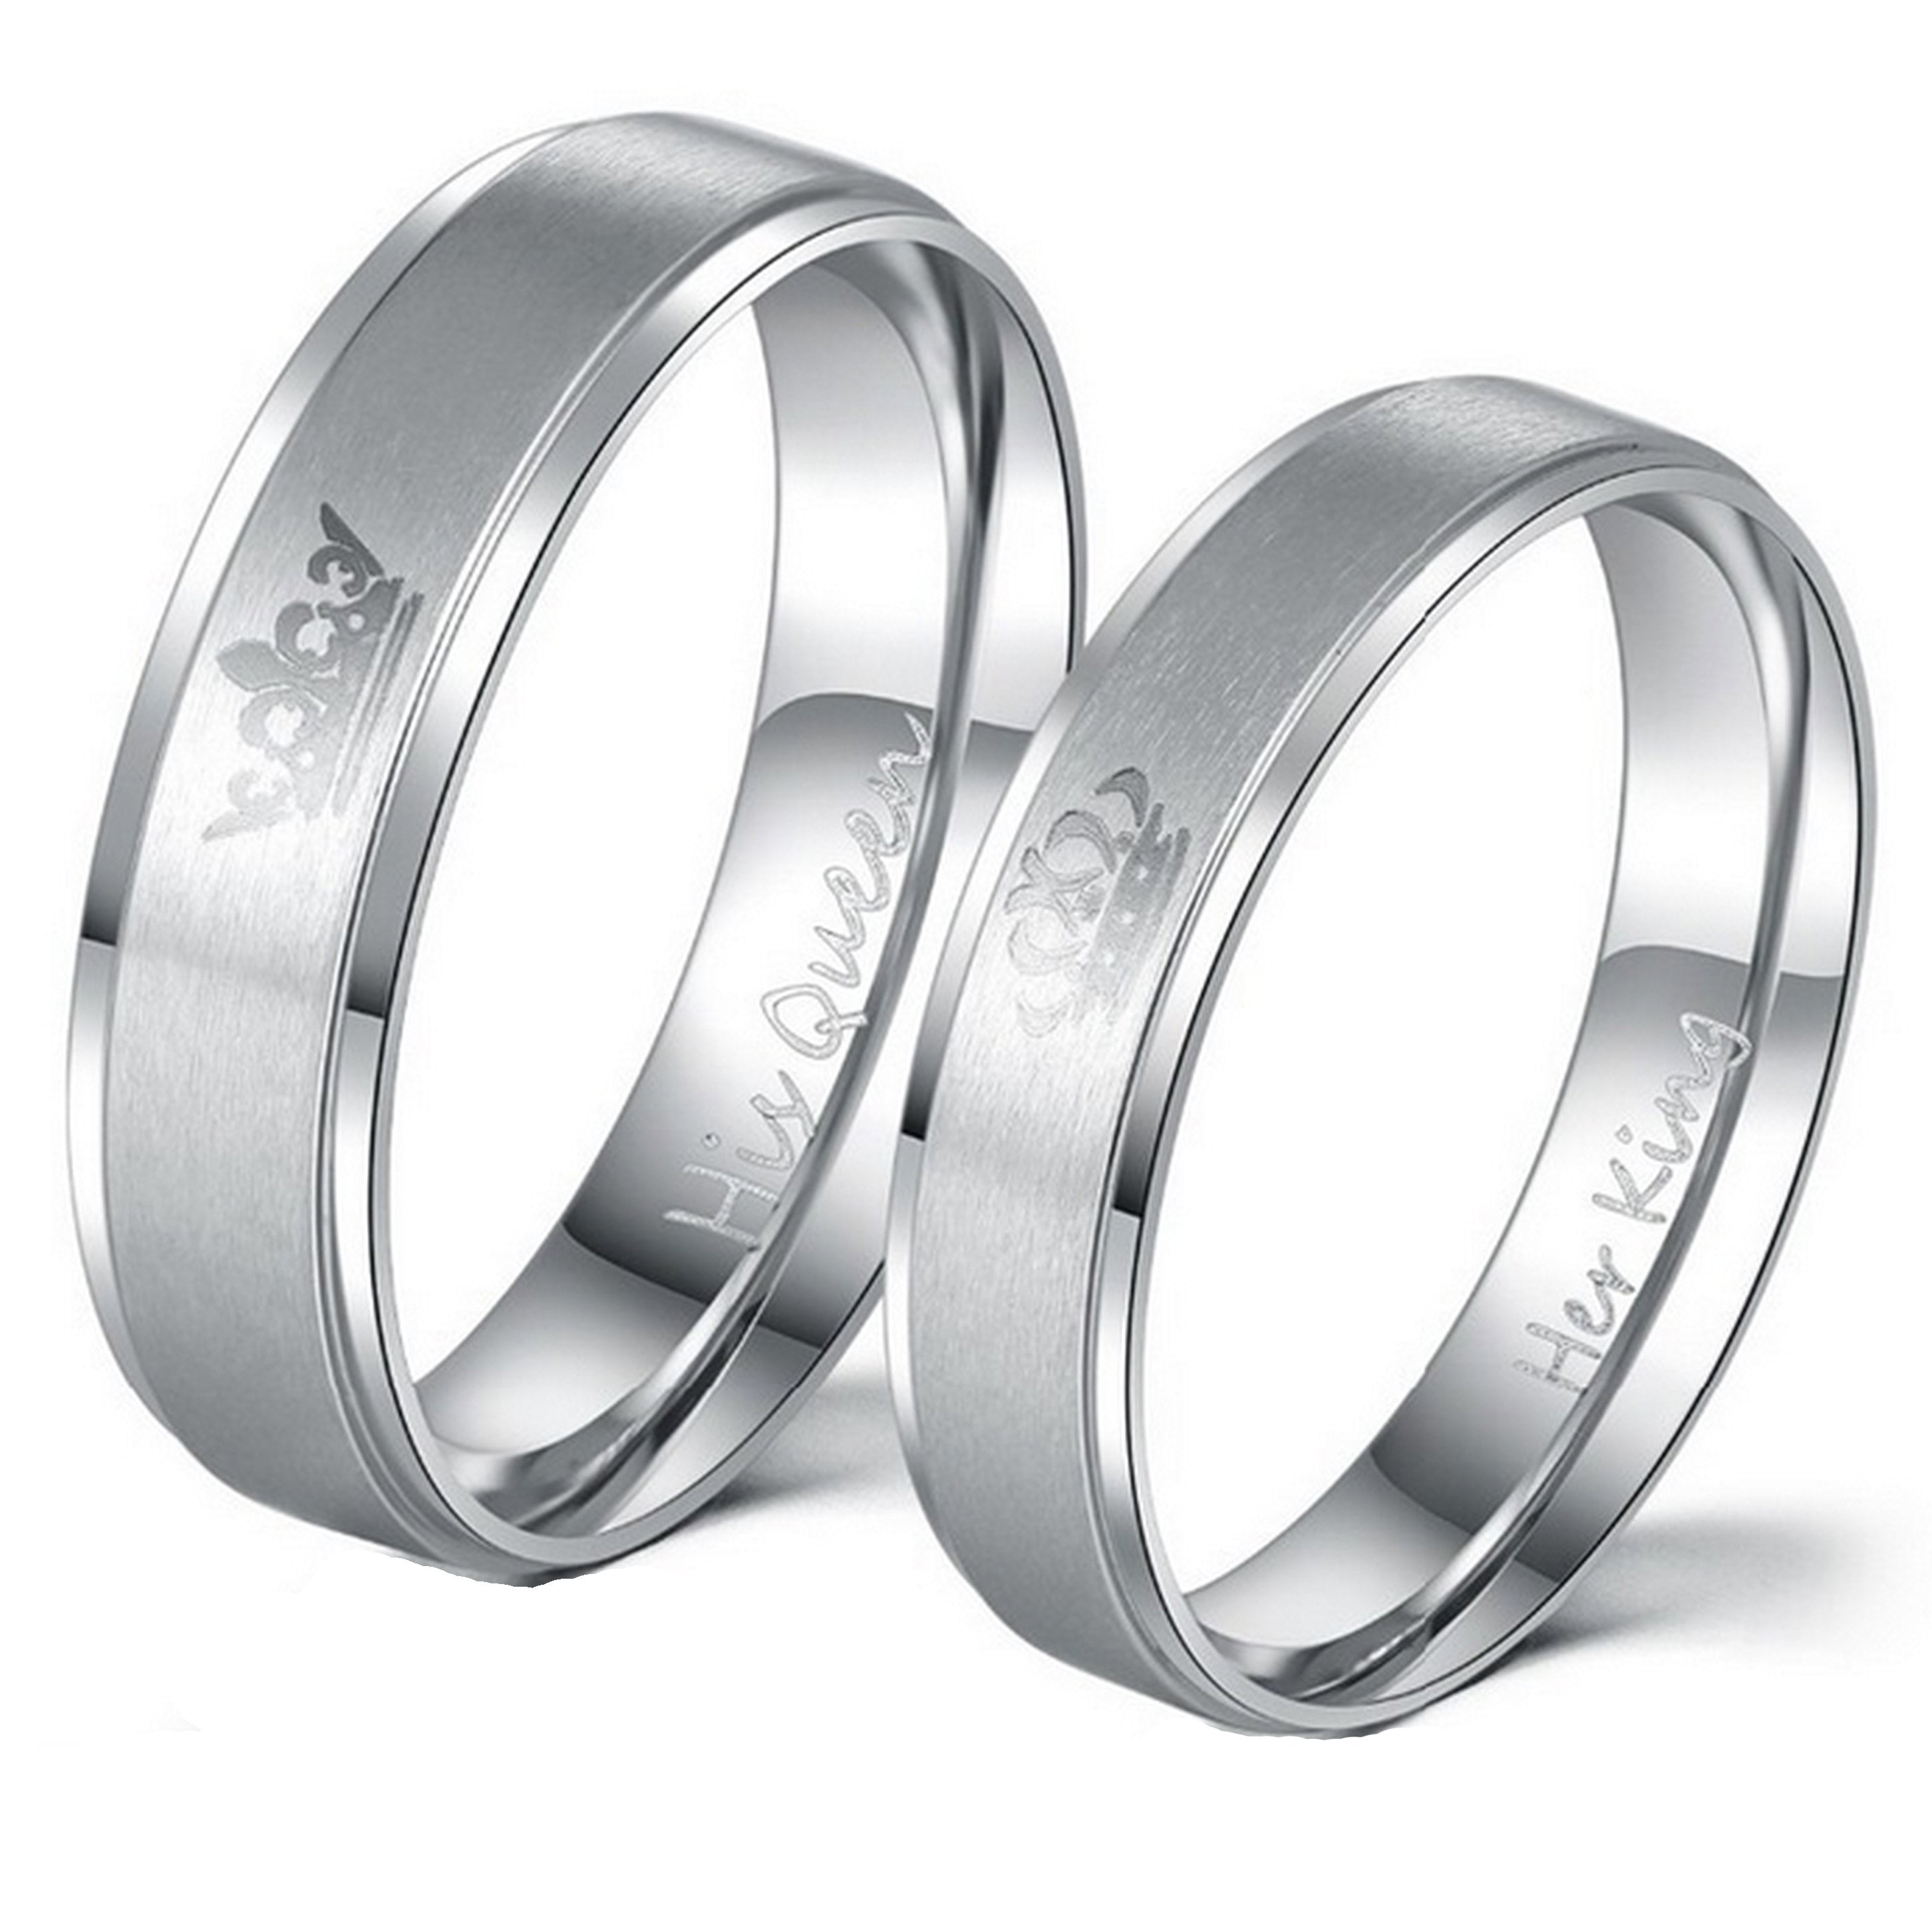 Jewellery Excellent Mens 1 high quality Stainless Steel Partnership ring wedding ring with free-of-charge engraving Stainless Steel